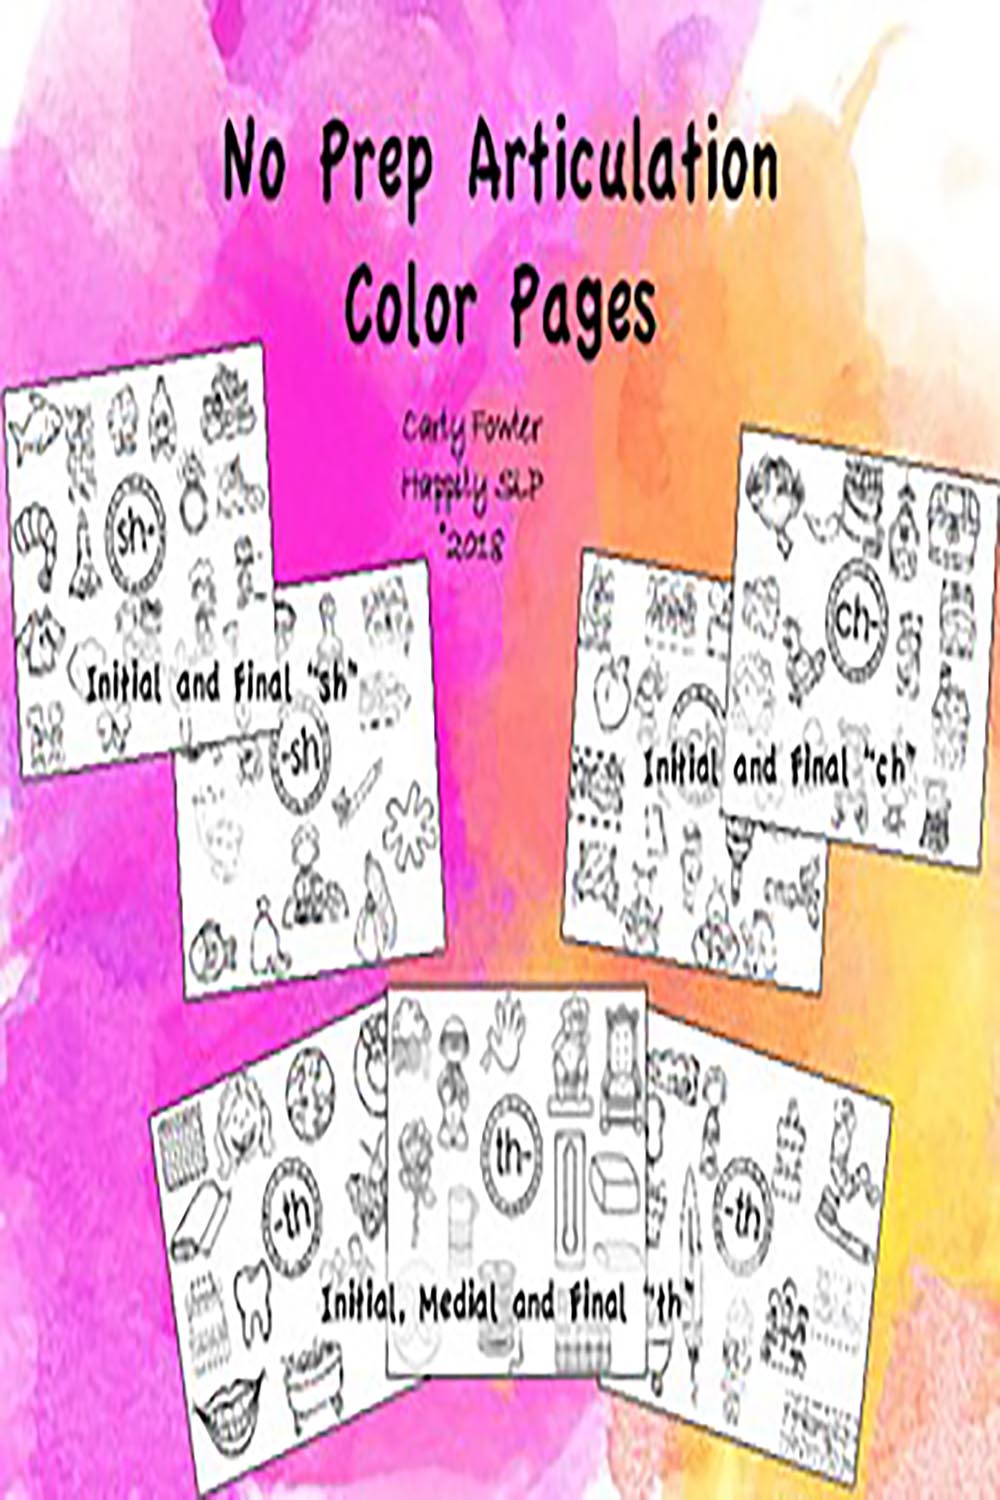 No Prep Articulation Coloring Pages for "sh" "ch" and "th" pinterest preview image.